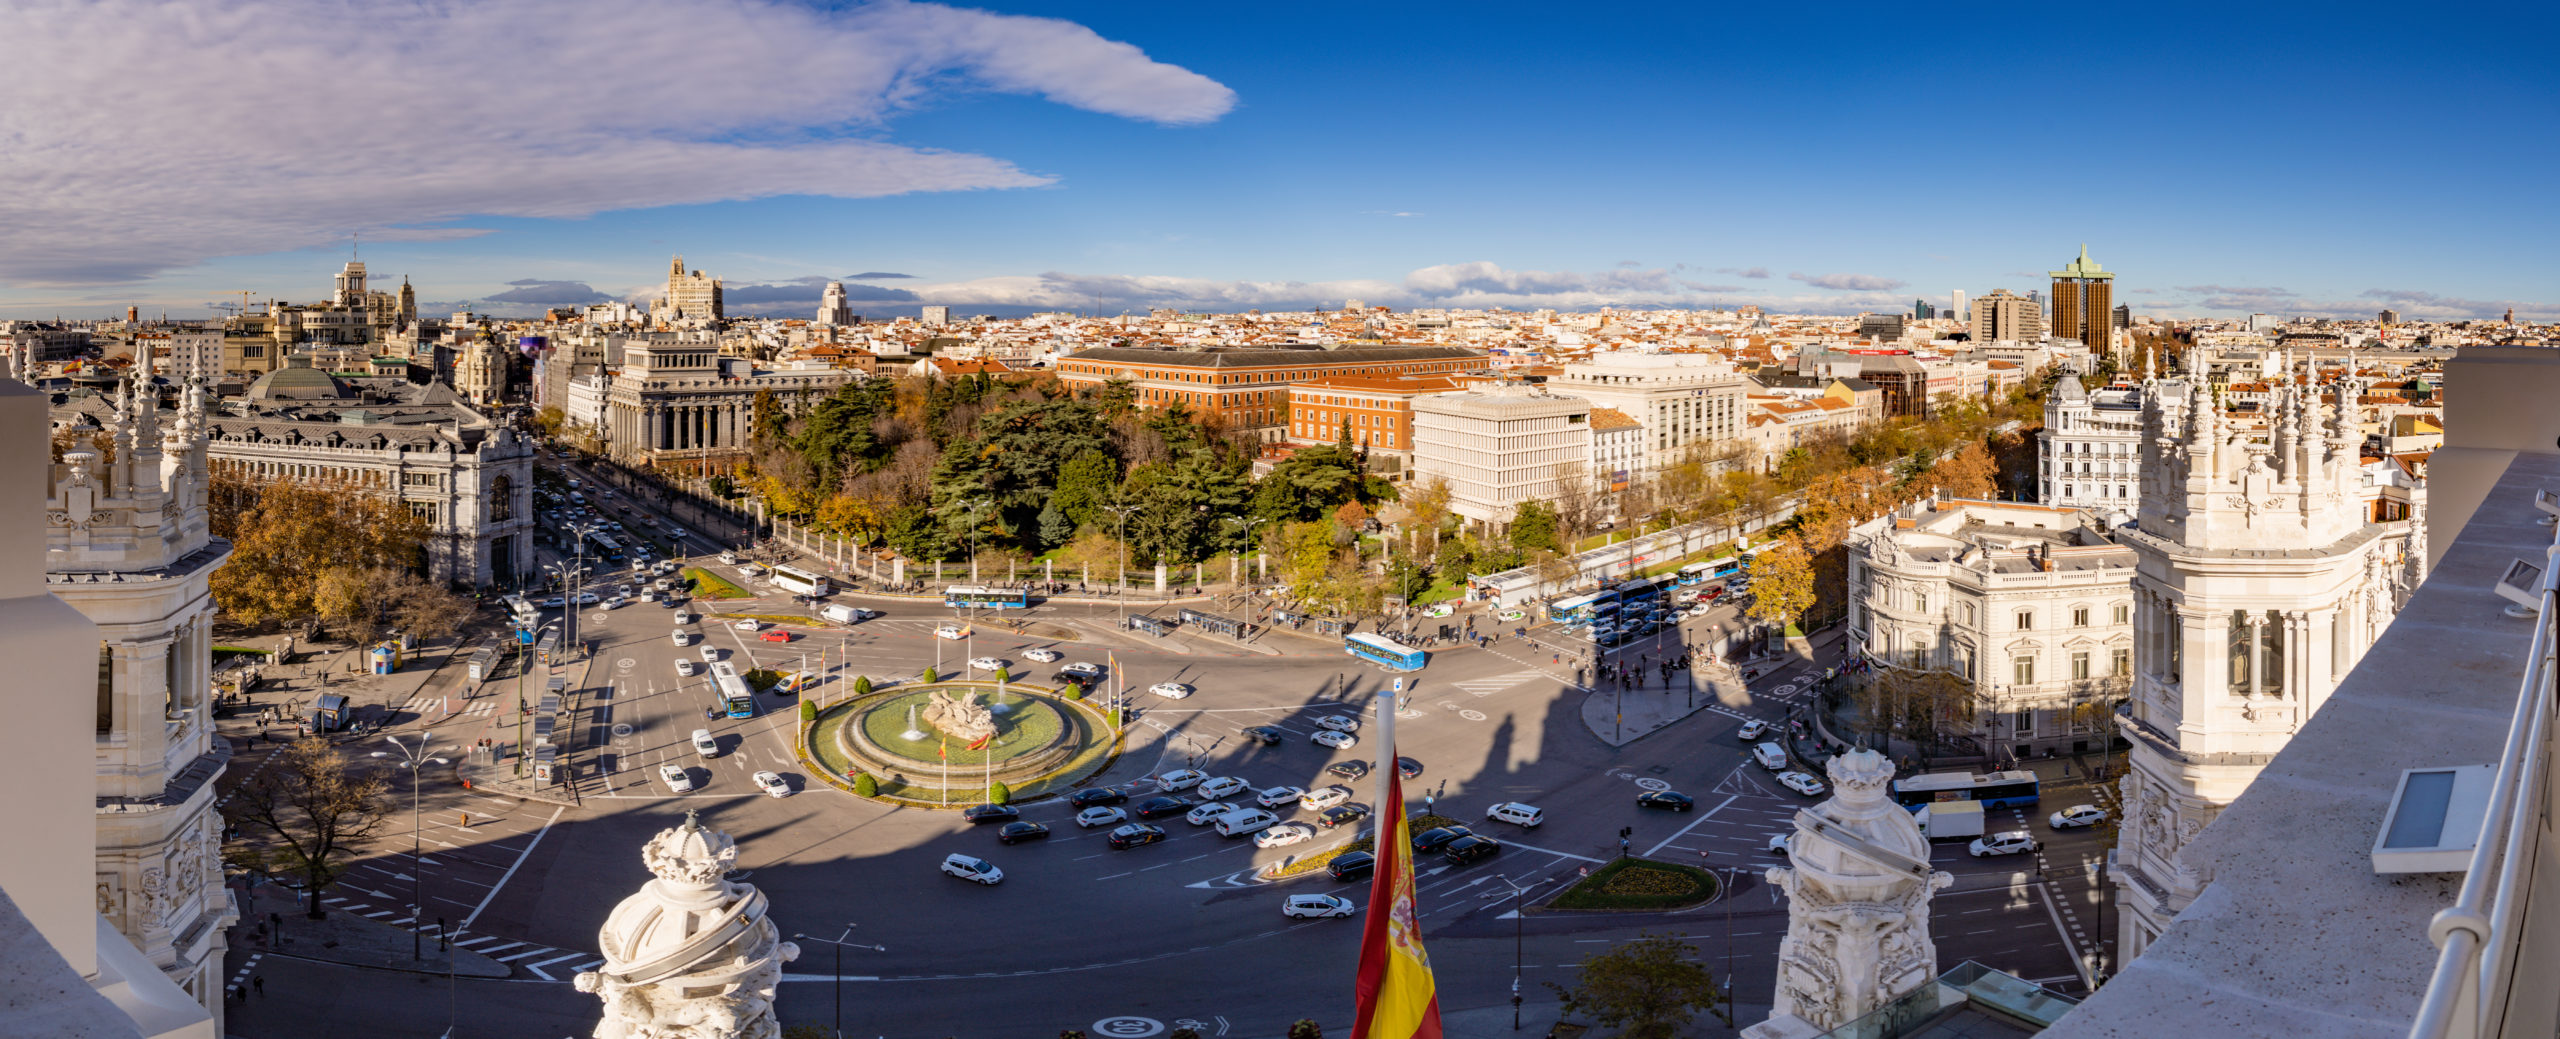 48 Hours in Madrid (Part 2)